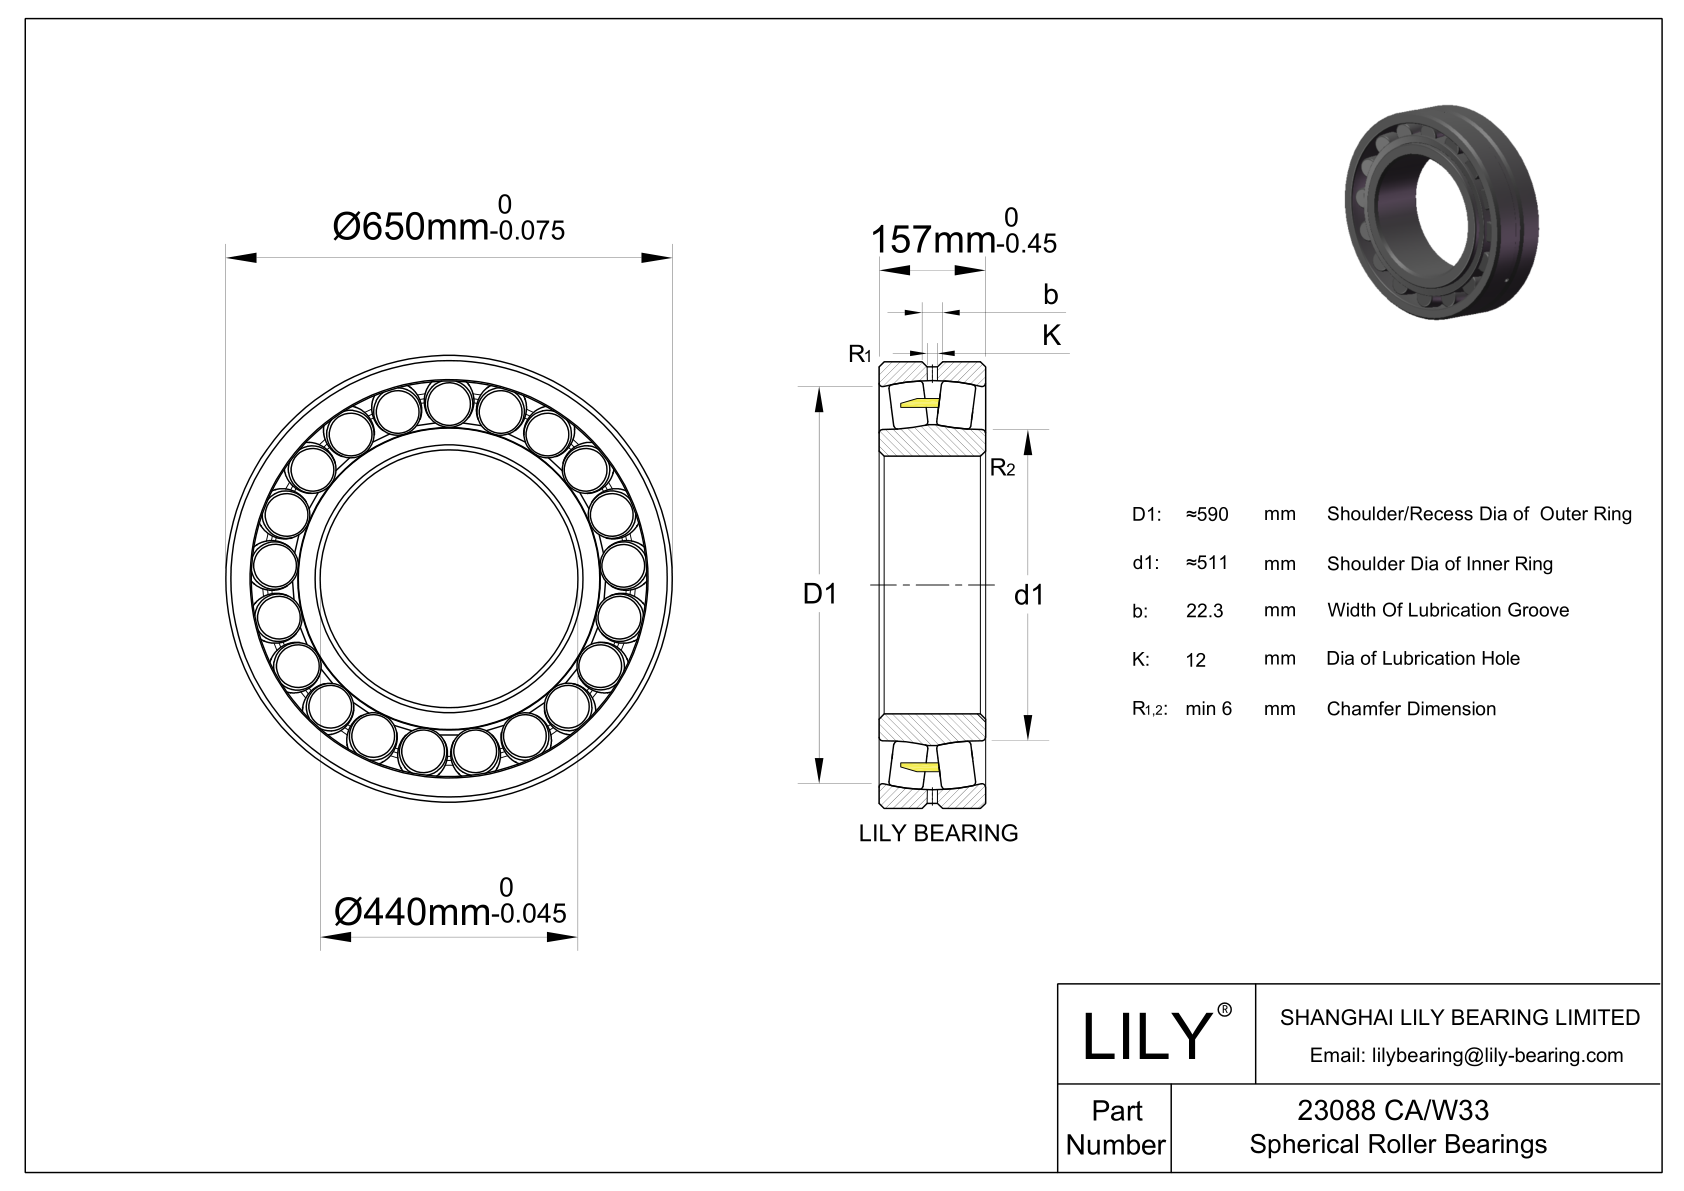 23088 CA/W33 Double Row Spherical Roller Bearing cad drawing